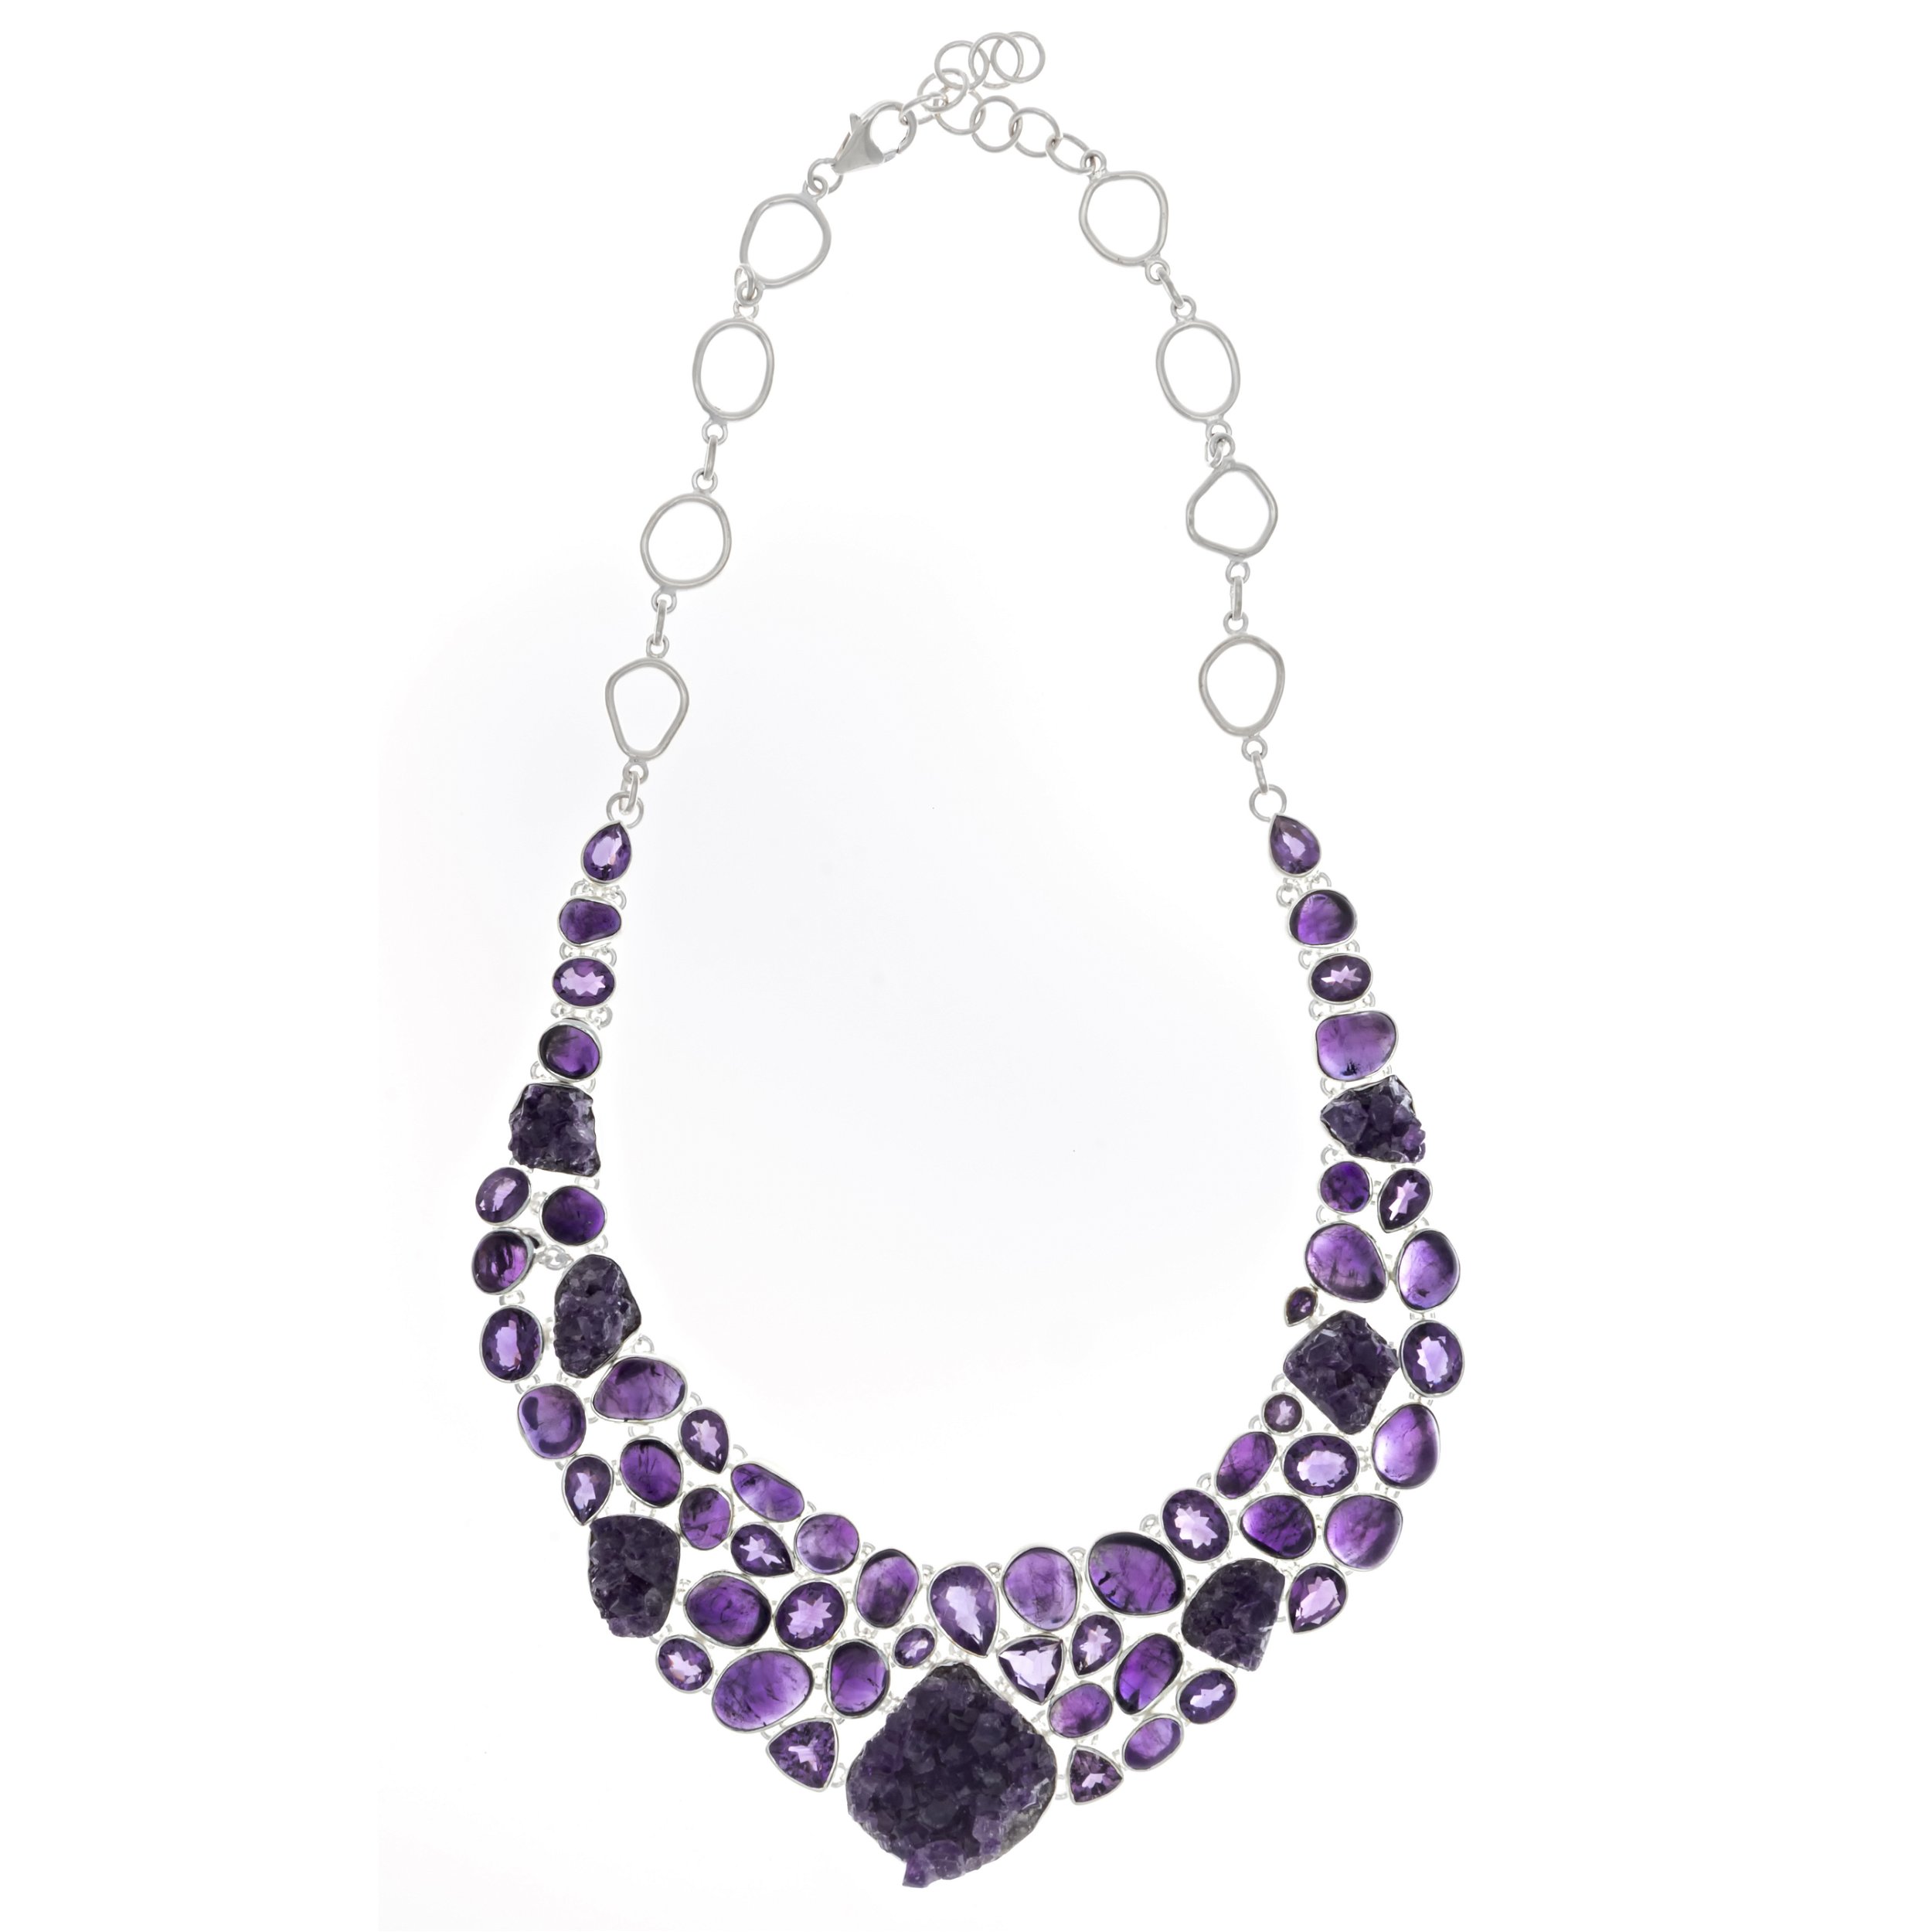 Druze Amethyst Necklace - Chunky Clusters In Cabochon & Faceted Matrix With Silver Bezels